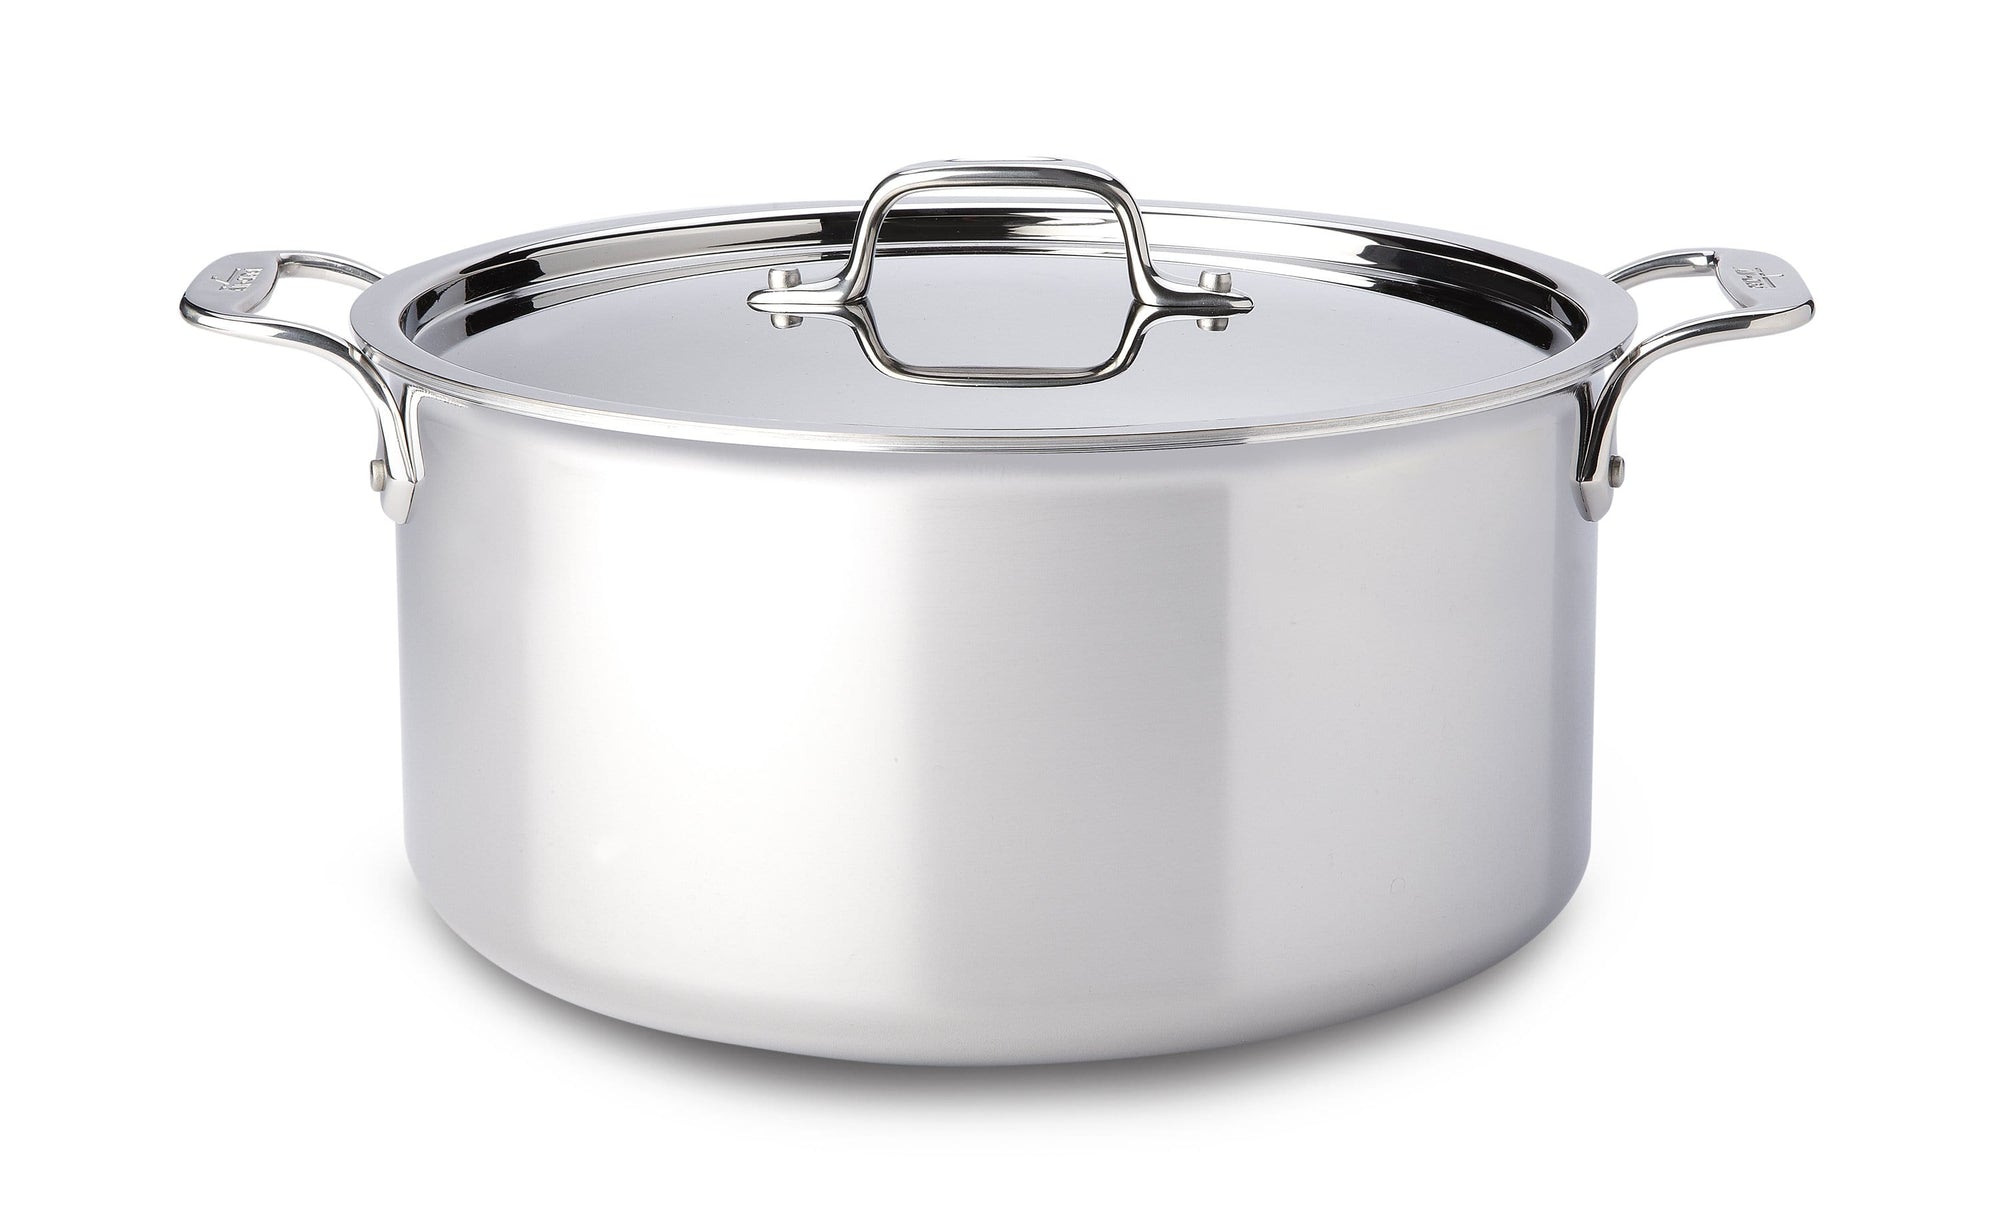 All-Clad Stock Pot All-Clad Stainless Steel 8 qt. Stock Pot